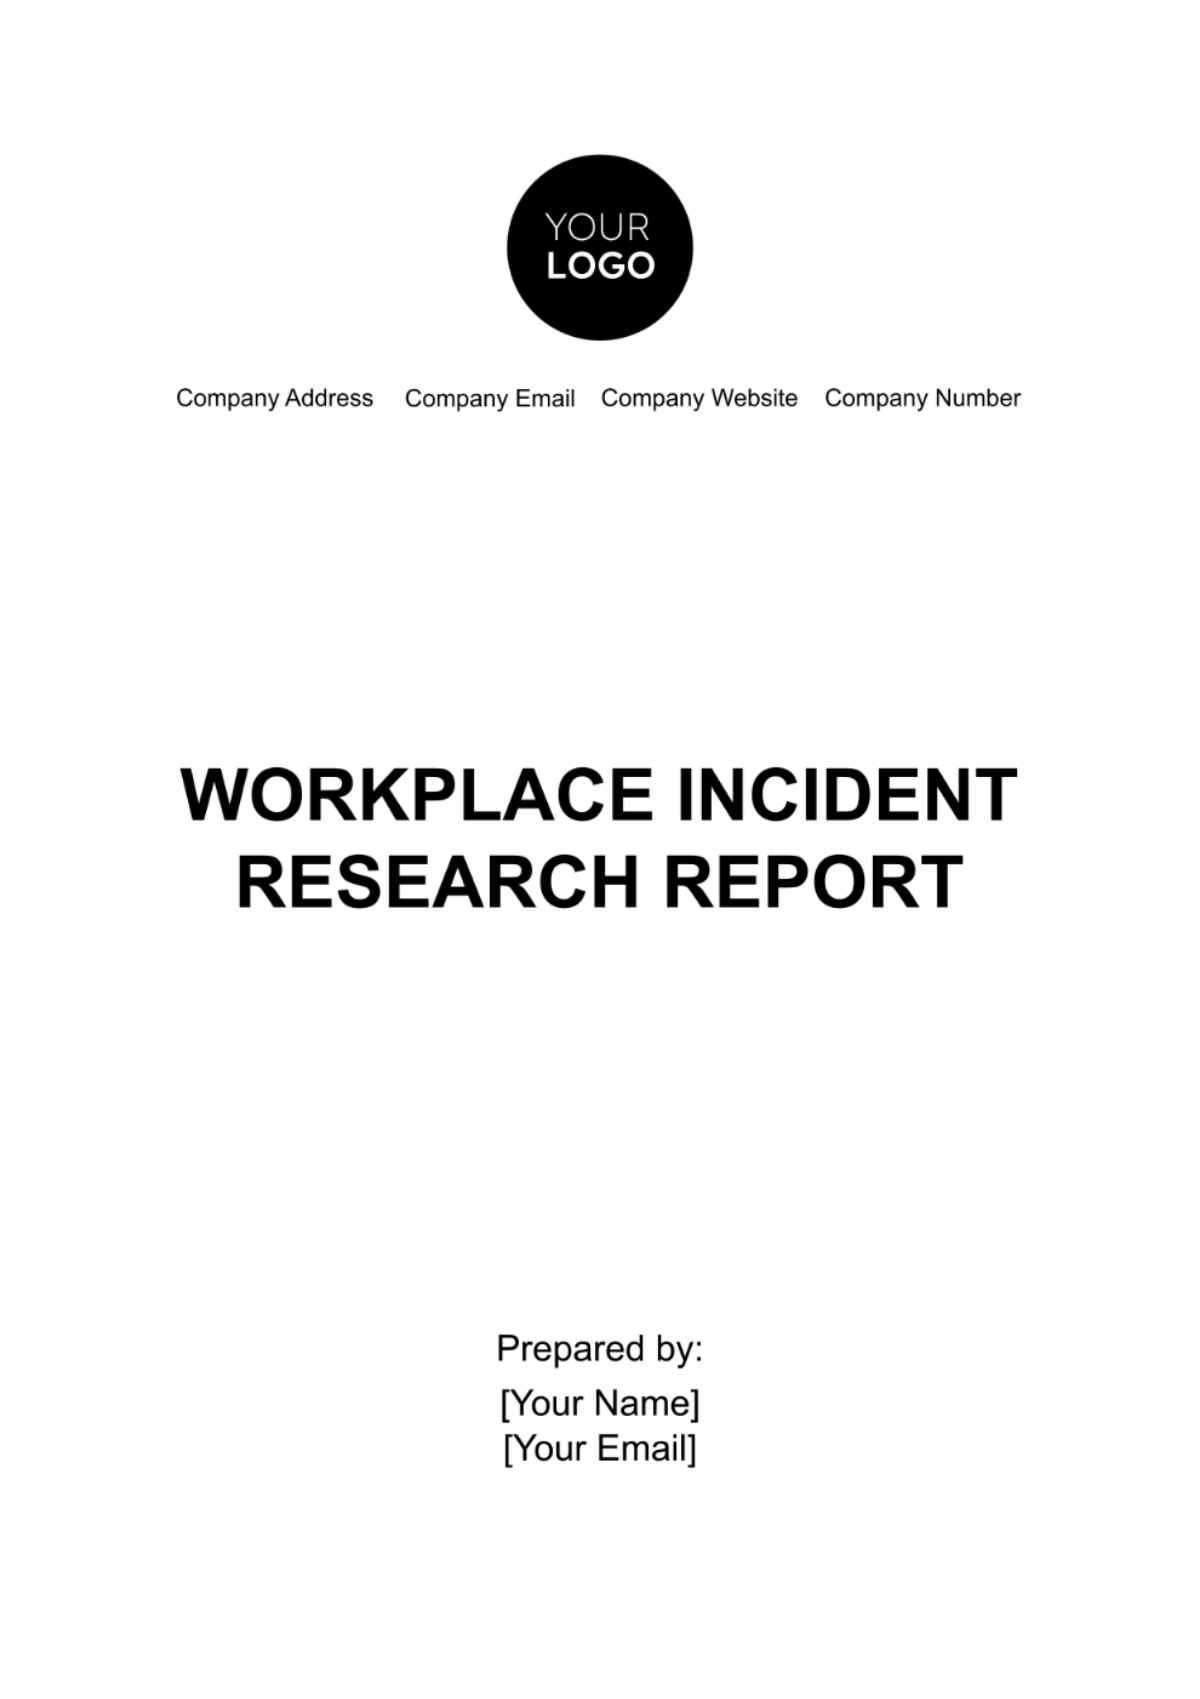 Workplace Incident Research Report Template